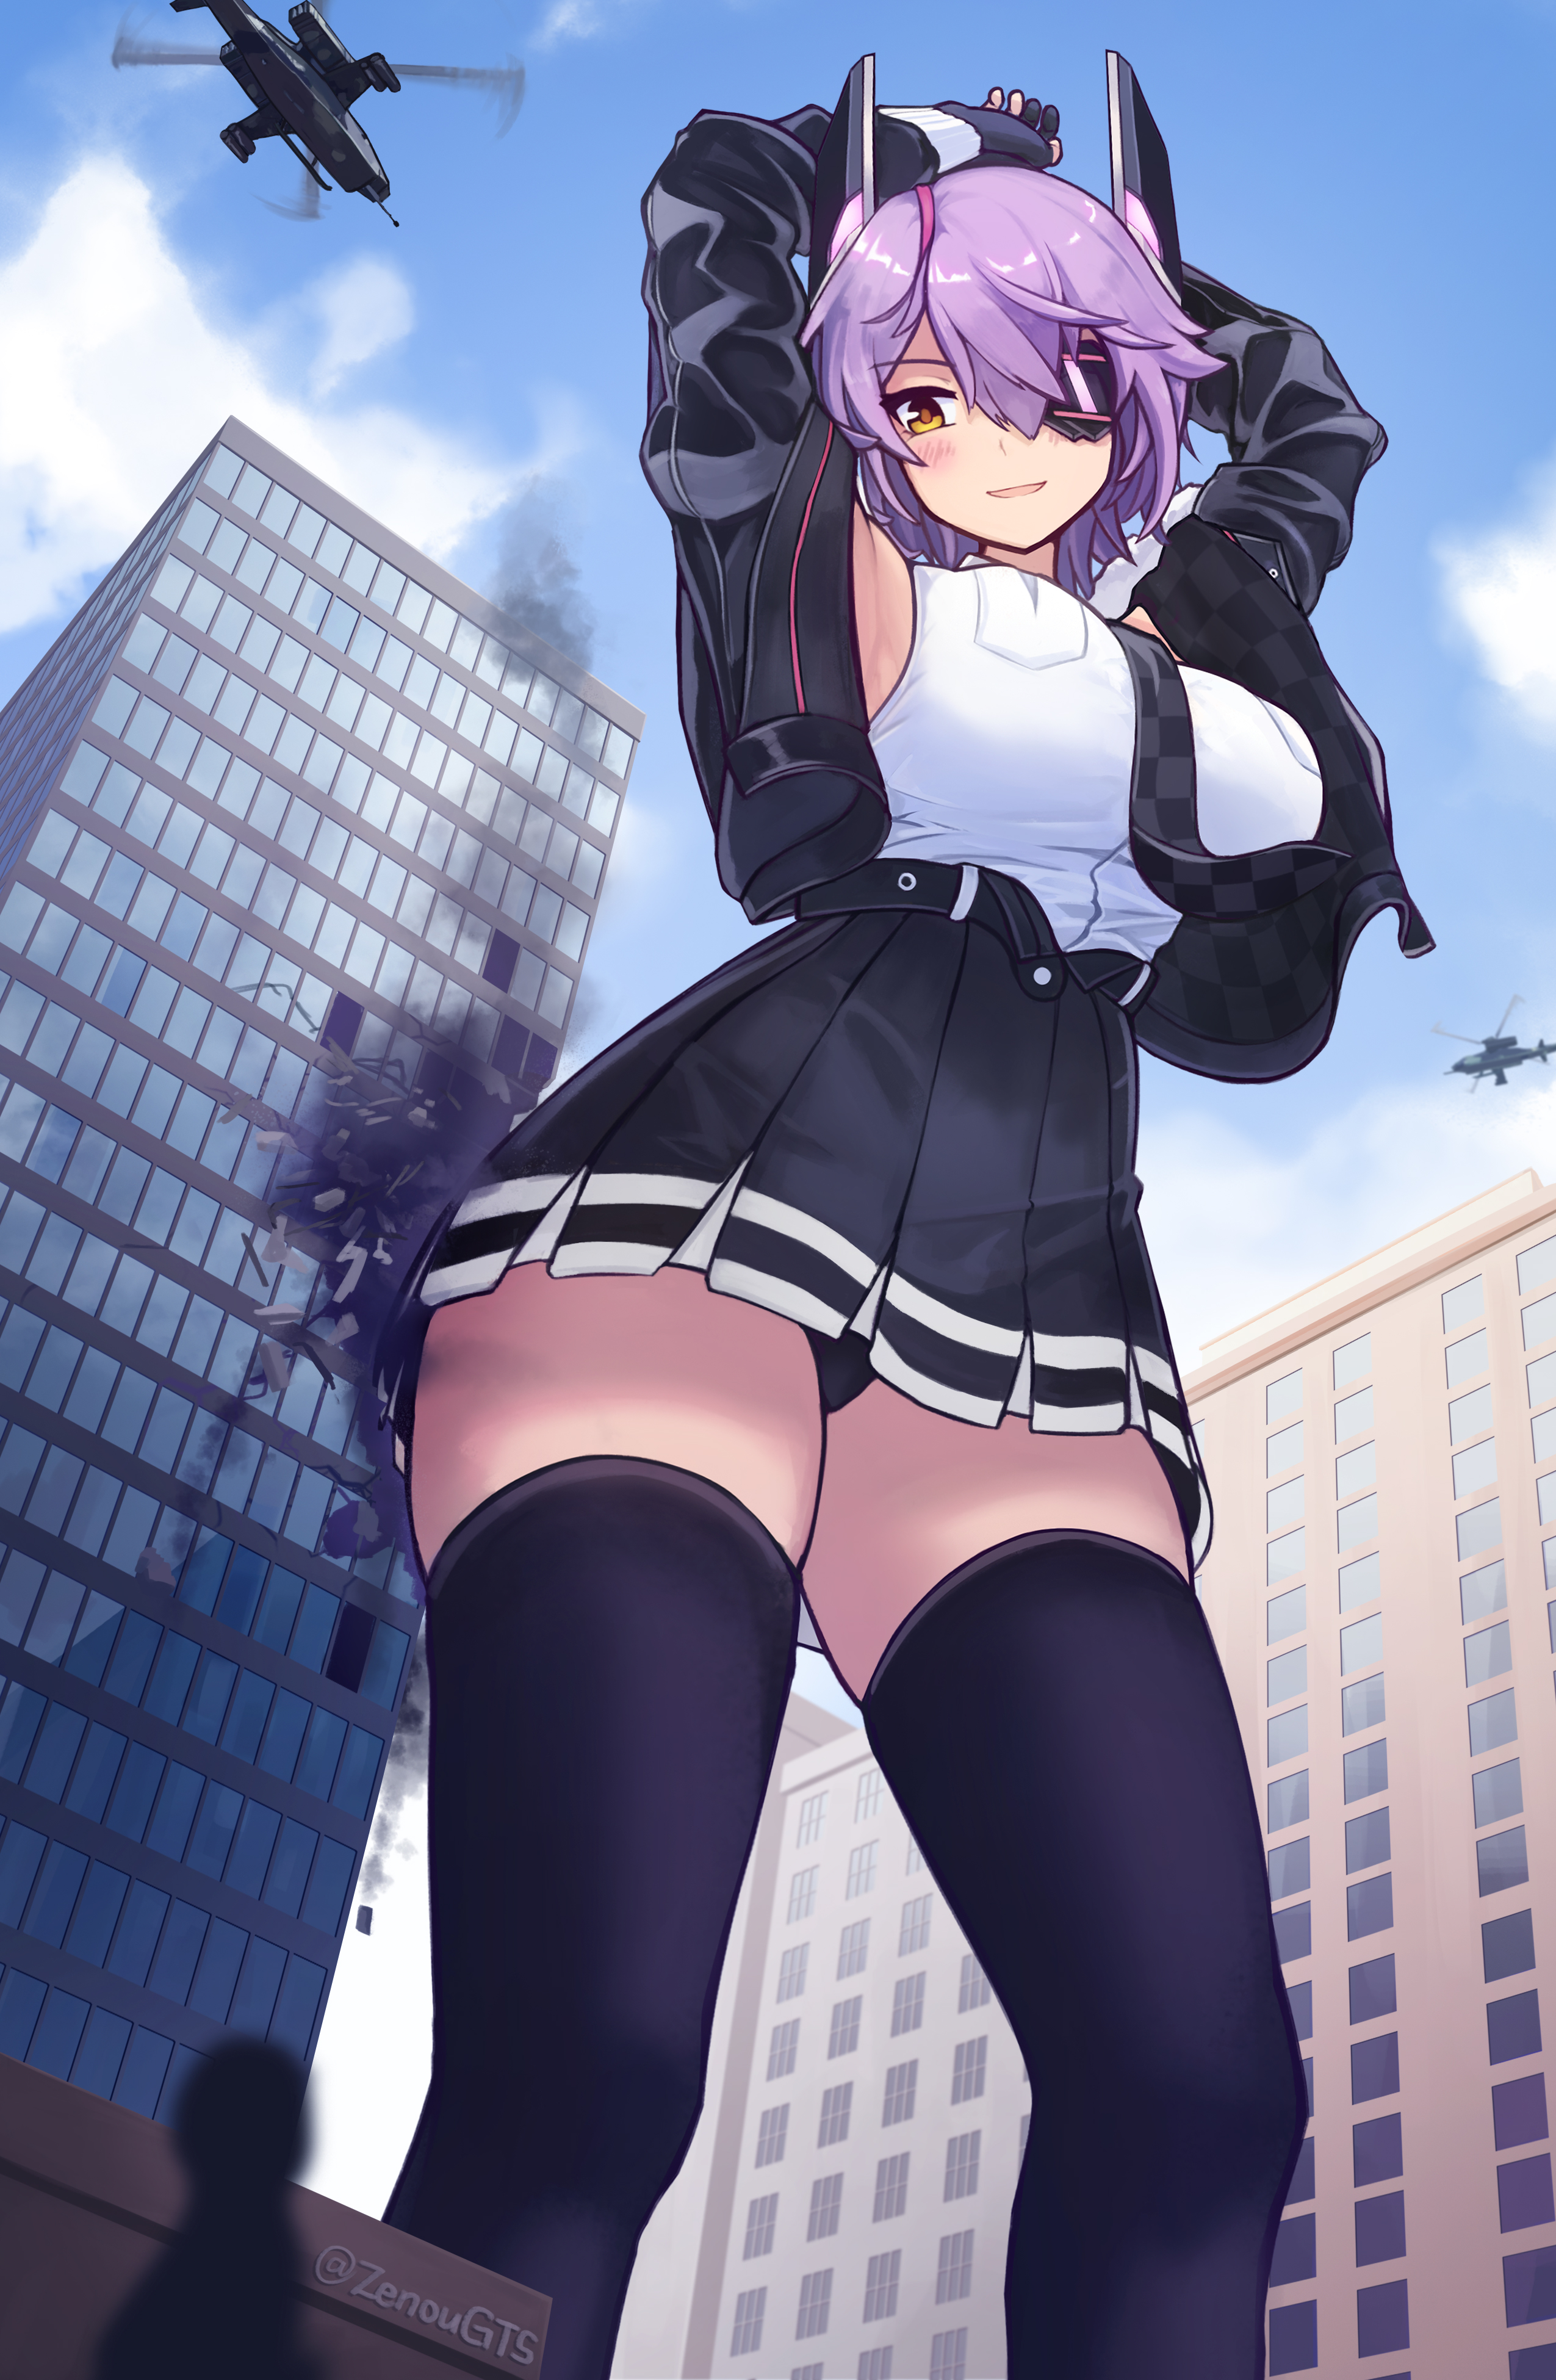 Anime 2550x3900 anime anime girls portrait display giant Tenryuu (KanColle) Kantai Collection purple hair yellow eyes blushing stockings building tie helicopters low-angle text